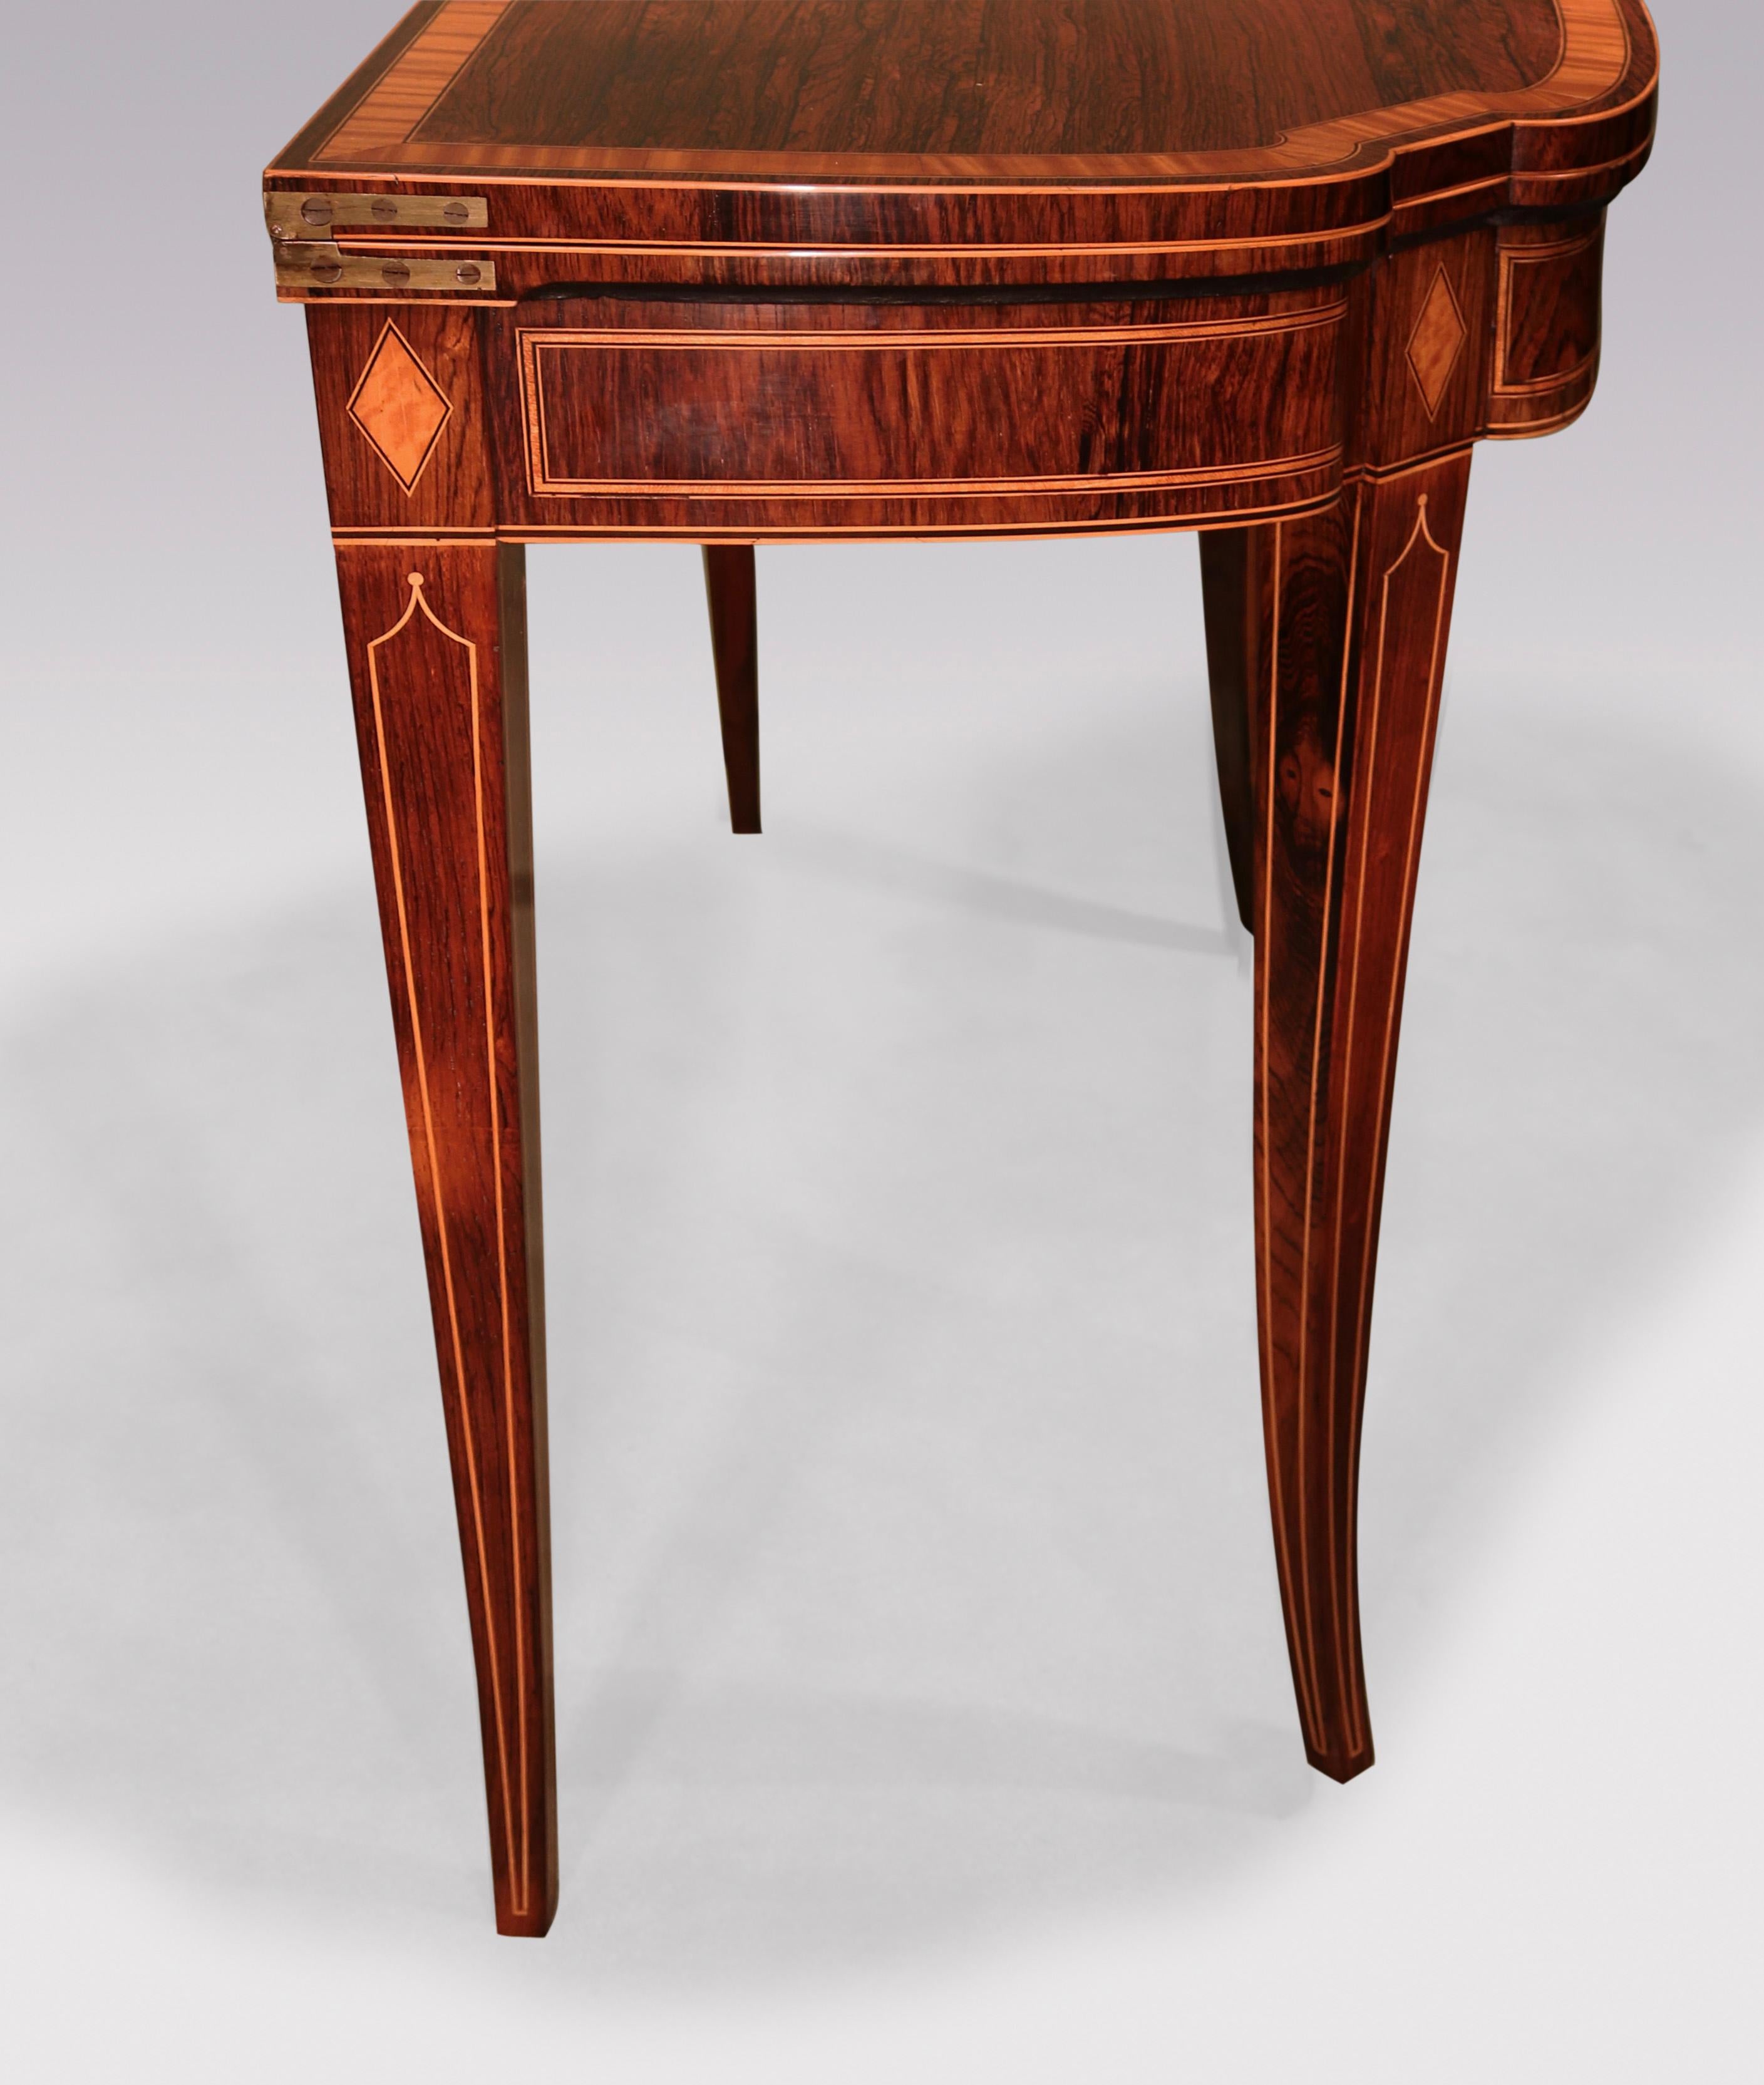 Rosewood A fine Sheraton period rosewood card table For Sale